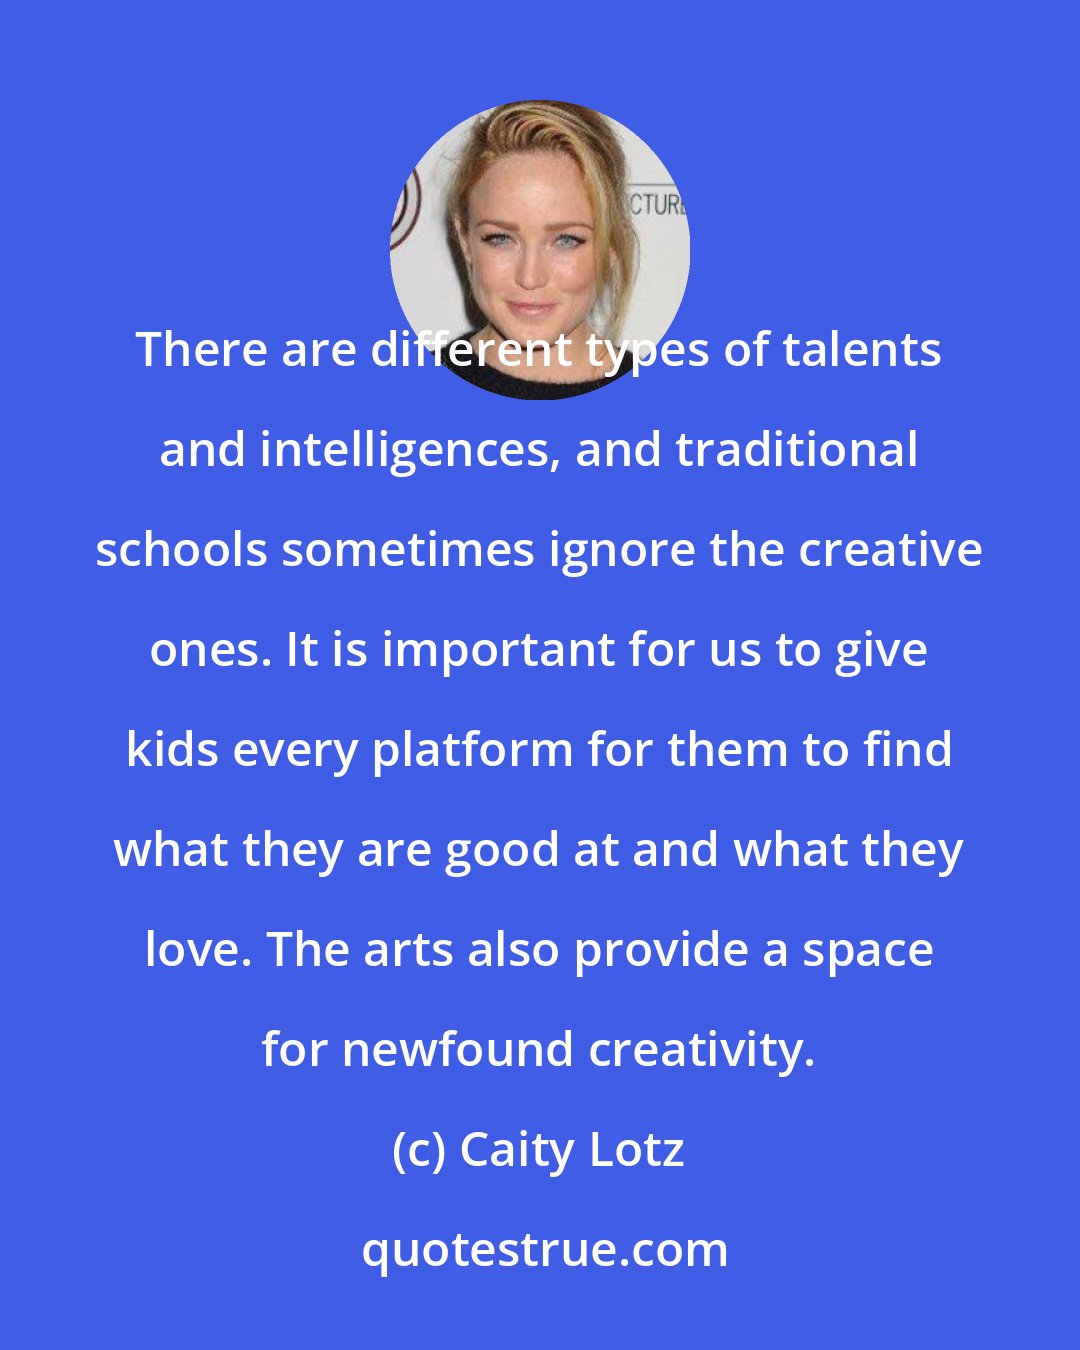 Caity Lotz: There are different types of talents and intelligences, and traditional schools sometimes ignore the creative ones. It is important for us to give kids every platform for them to find what they are good at and what they love. The arts also provide a space for newfound creativity.